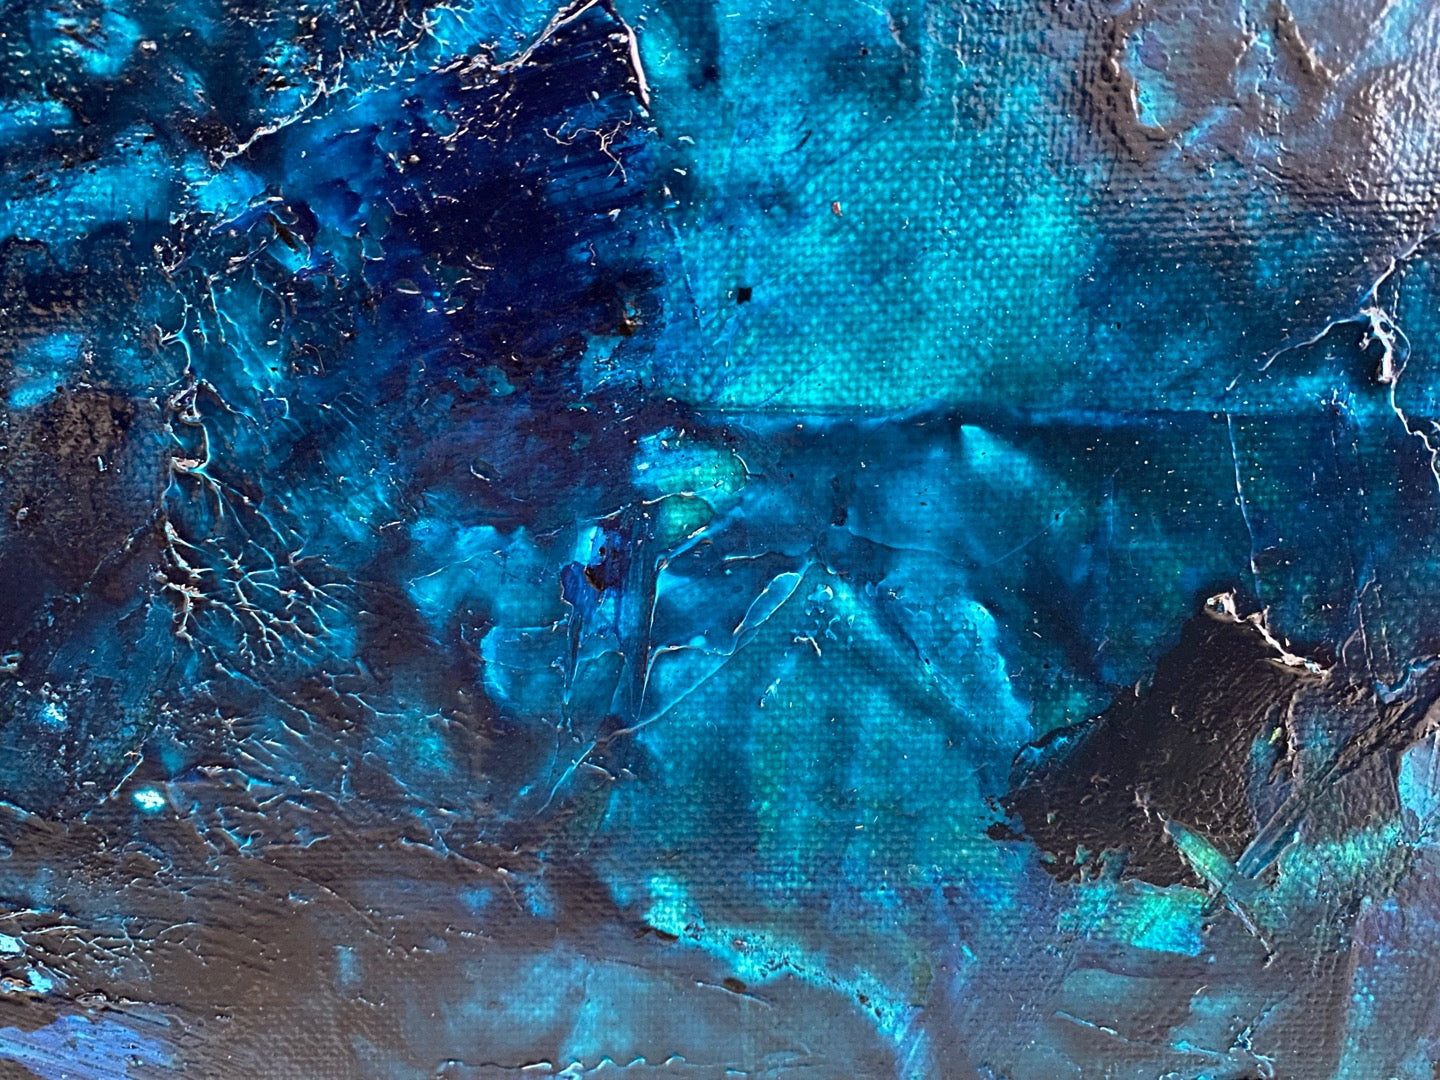 Emerald Blue Sea 93 cm x 61 cm Blue Textured Abstract Painting